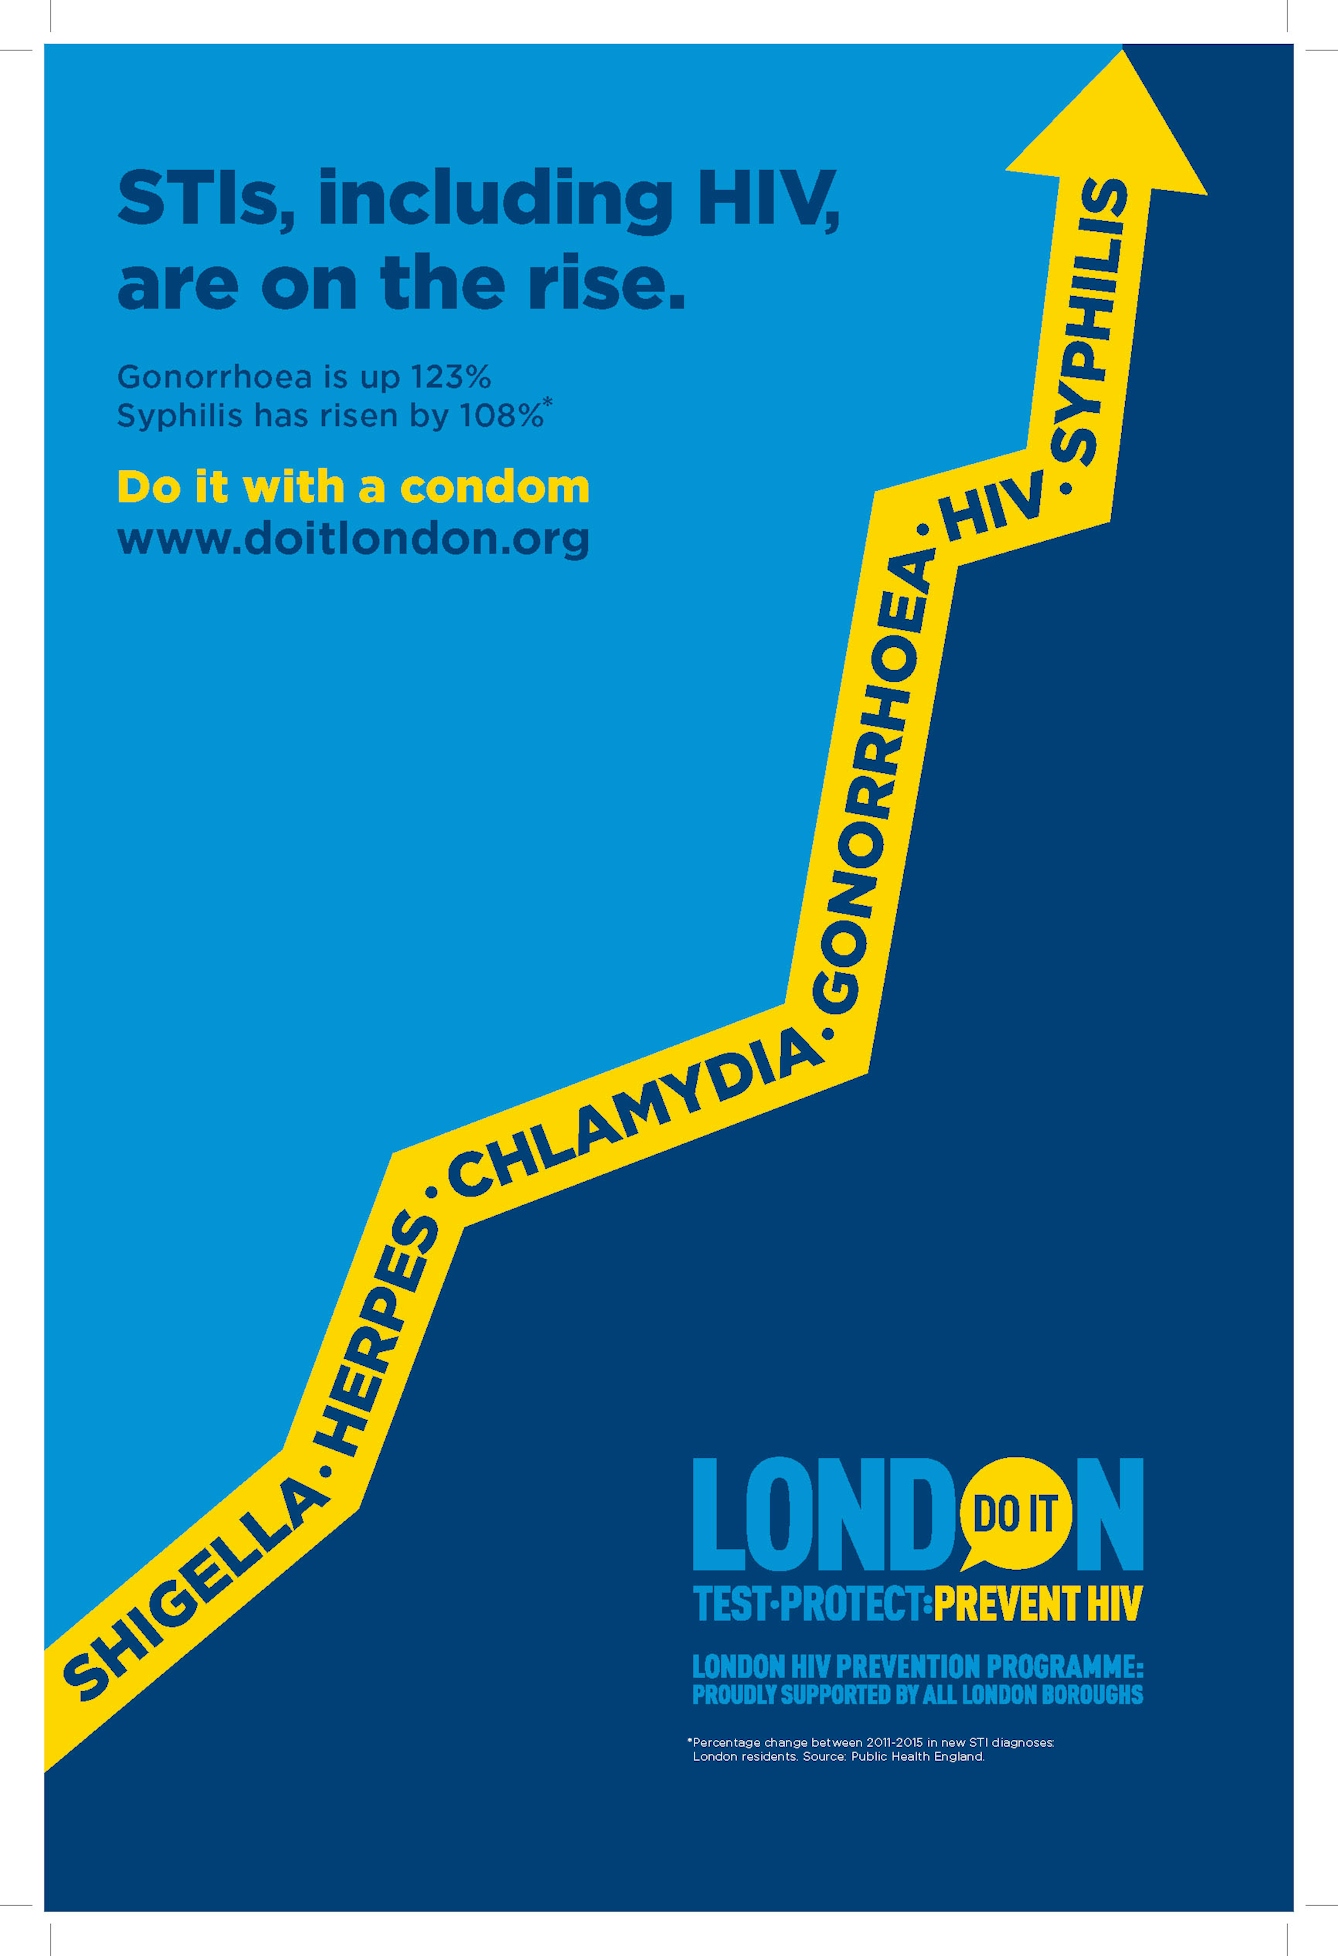 Do It London campaign poster stating that "STIs, including HIV, are on the rise." Illustrated by a zig-zagging arrow going from bottom left to top right, featuring names of STIs.